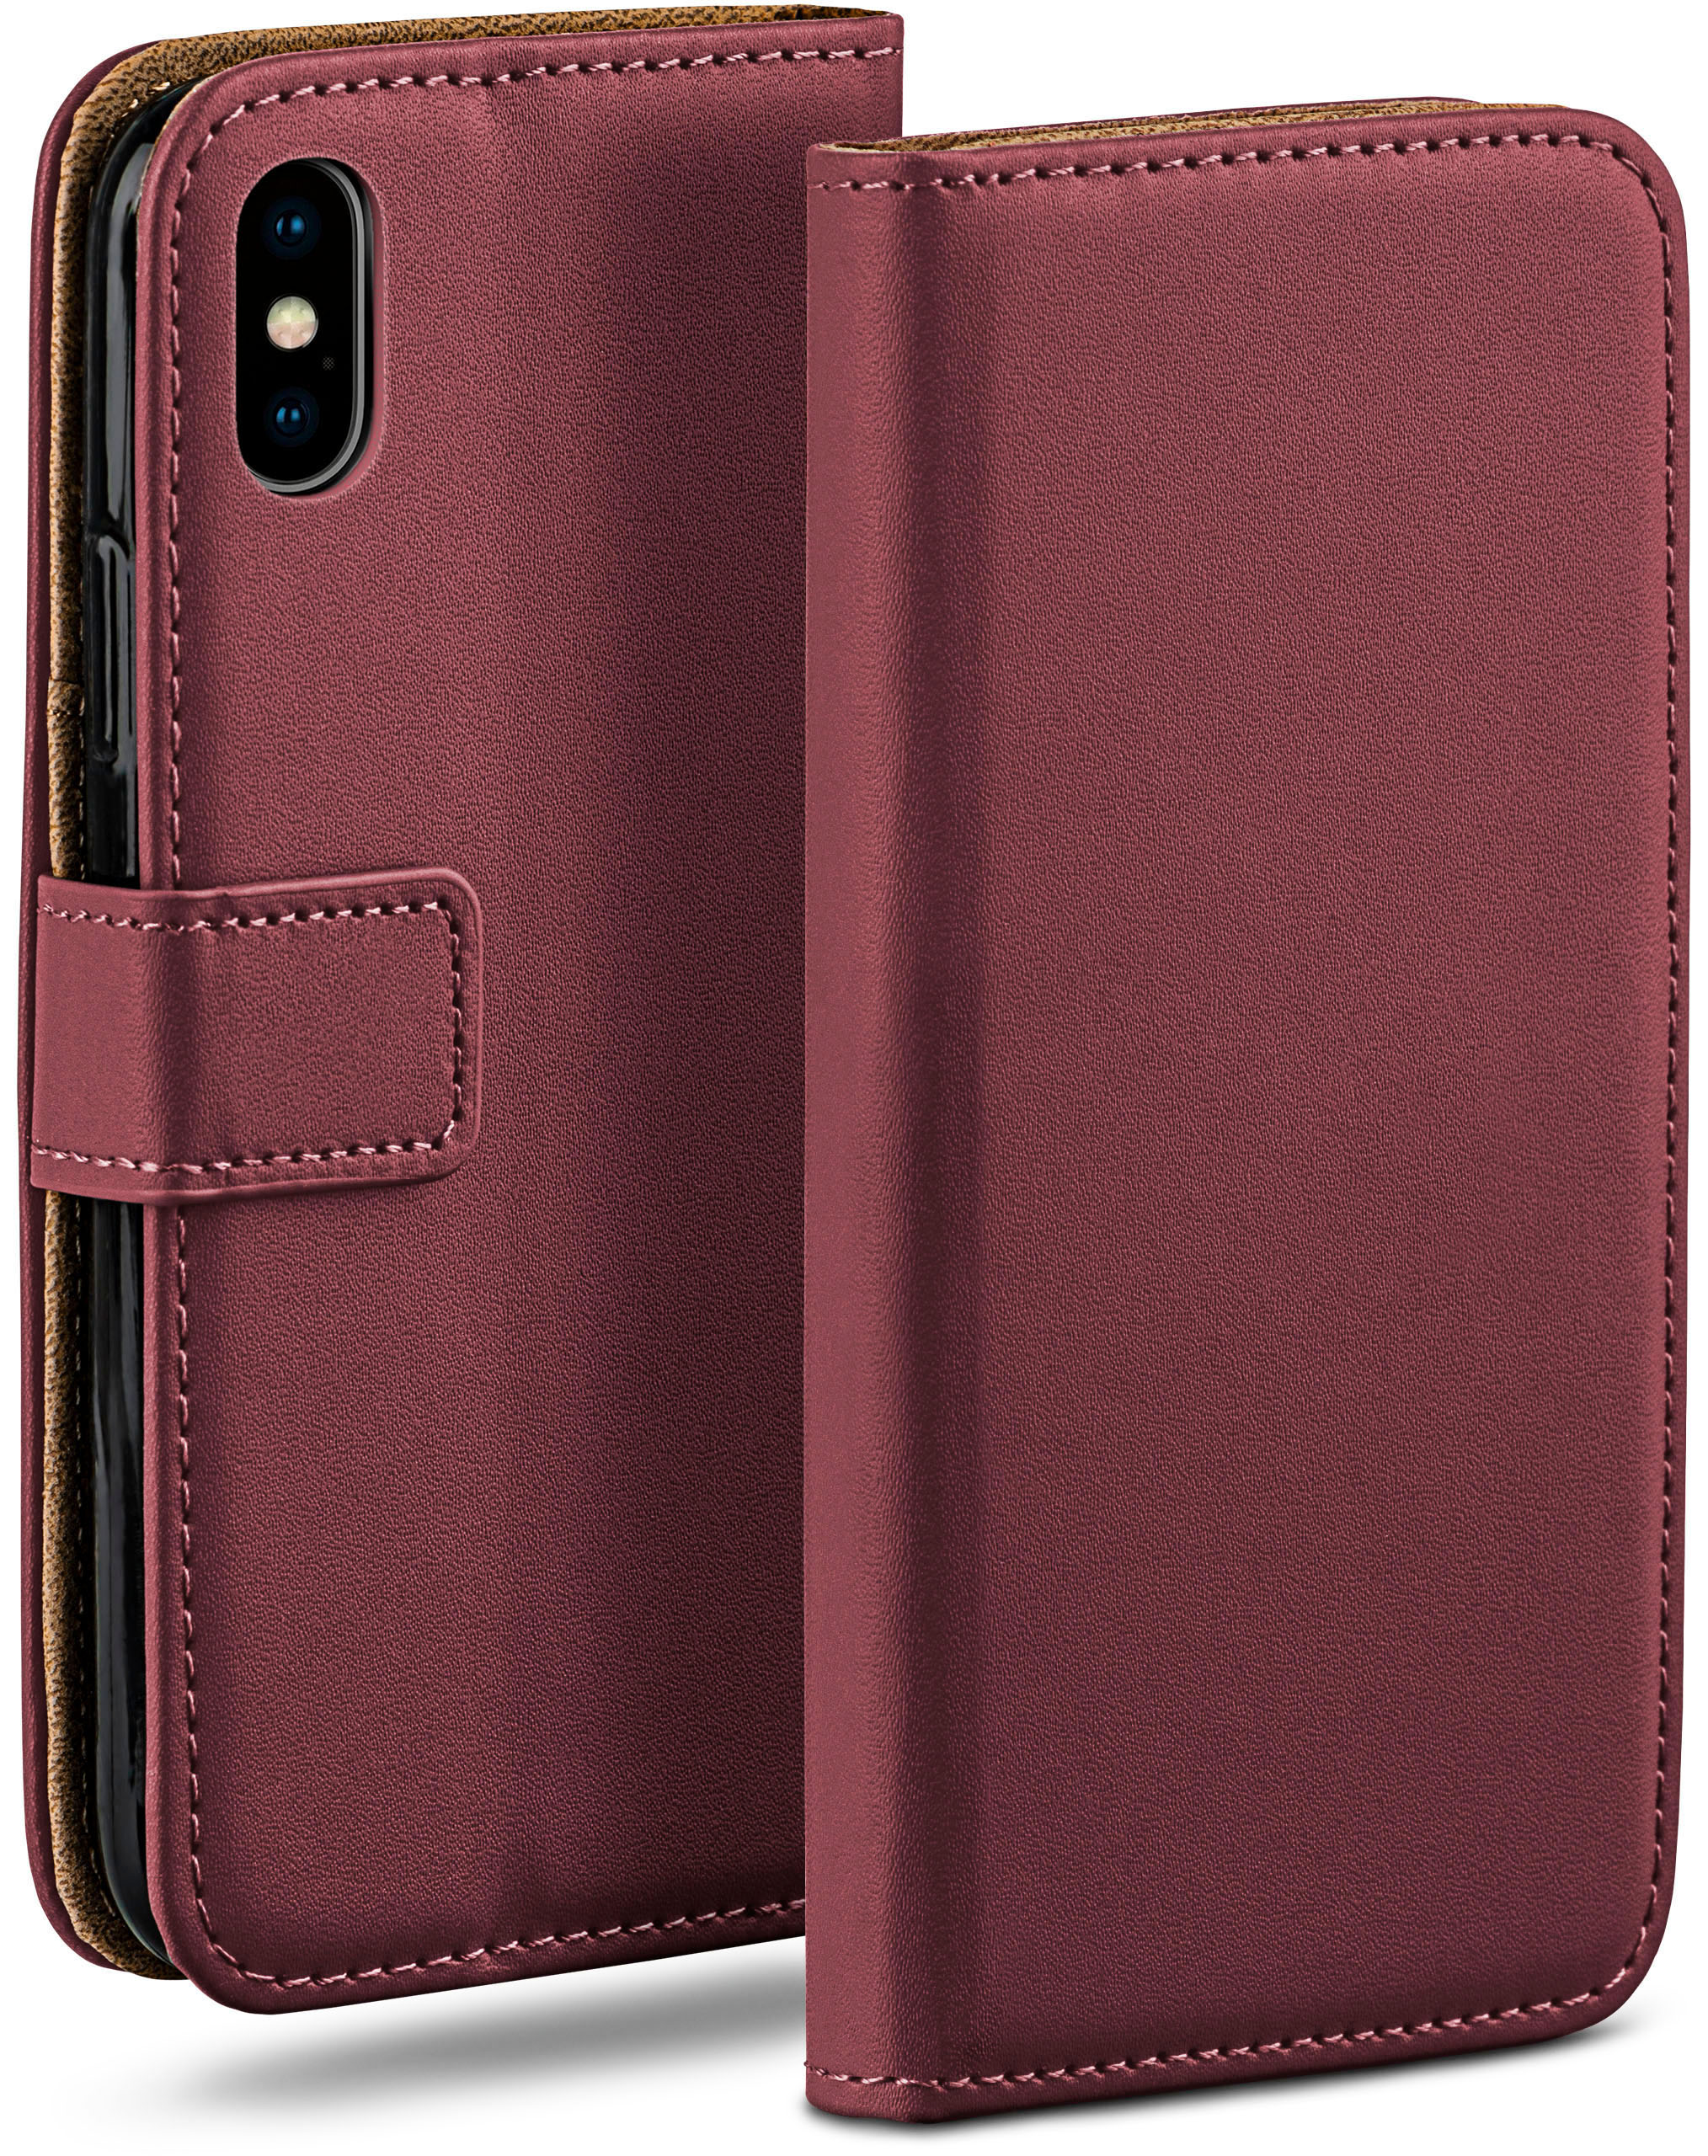 iPhone Apple, MOEX Bookcover, XS, Maroon-Red Book / iPhone X Case,